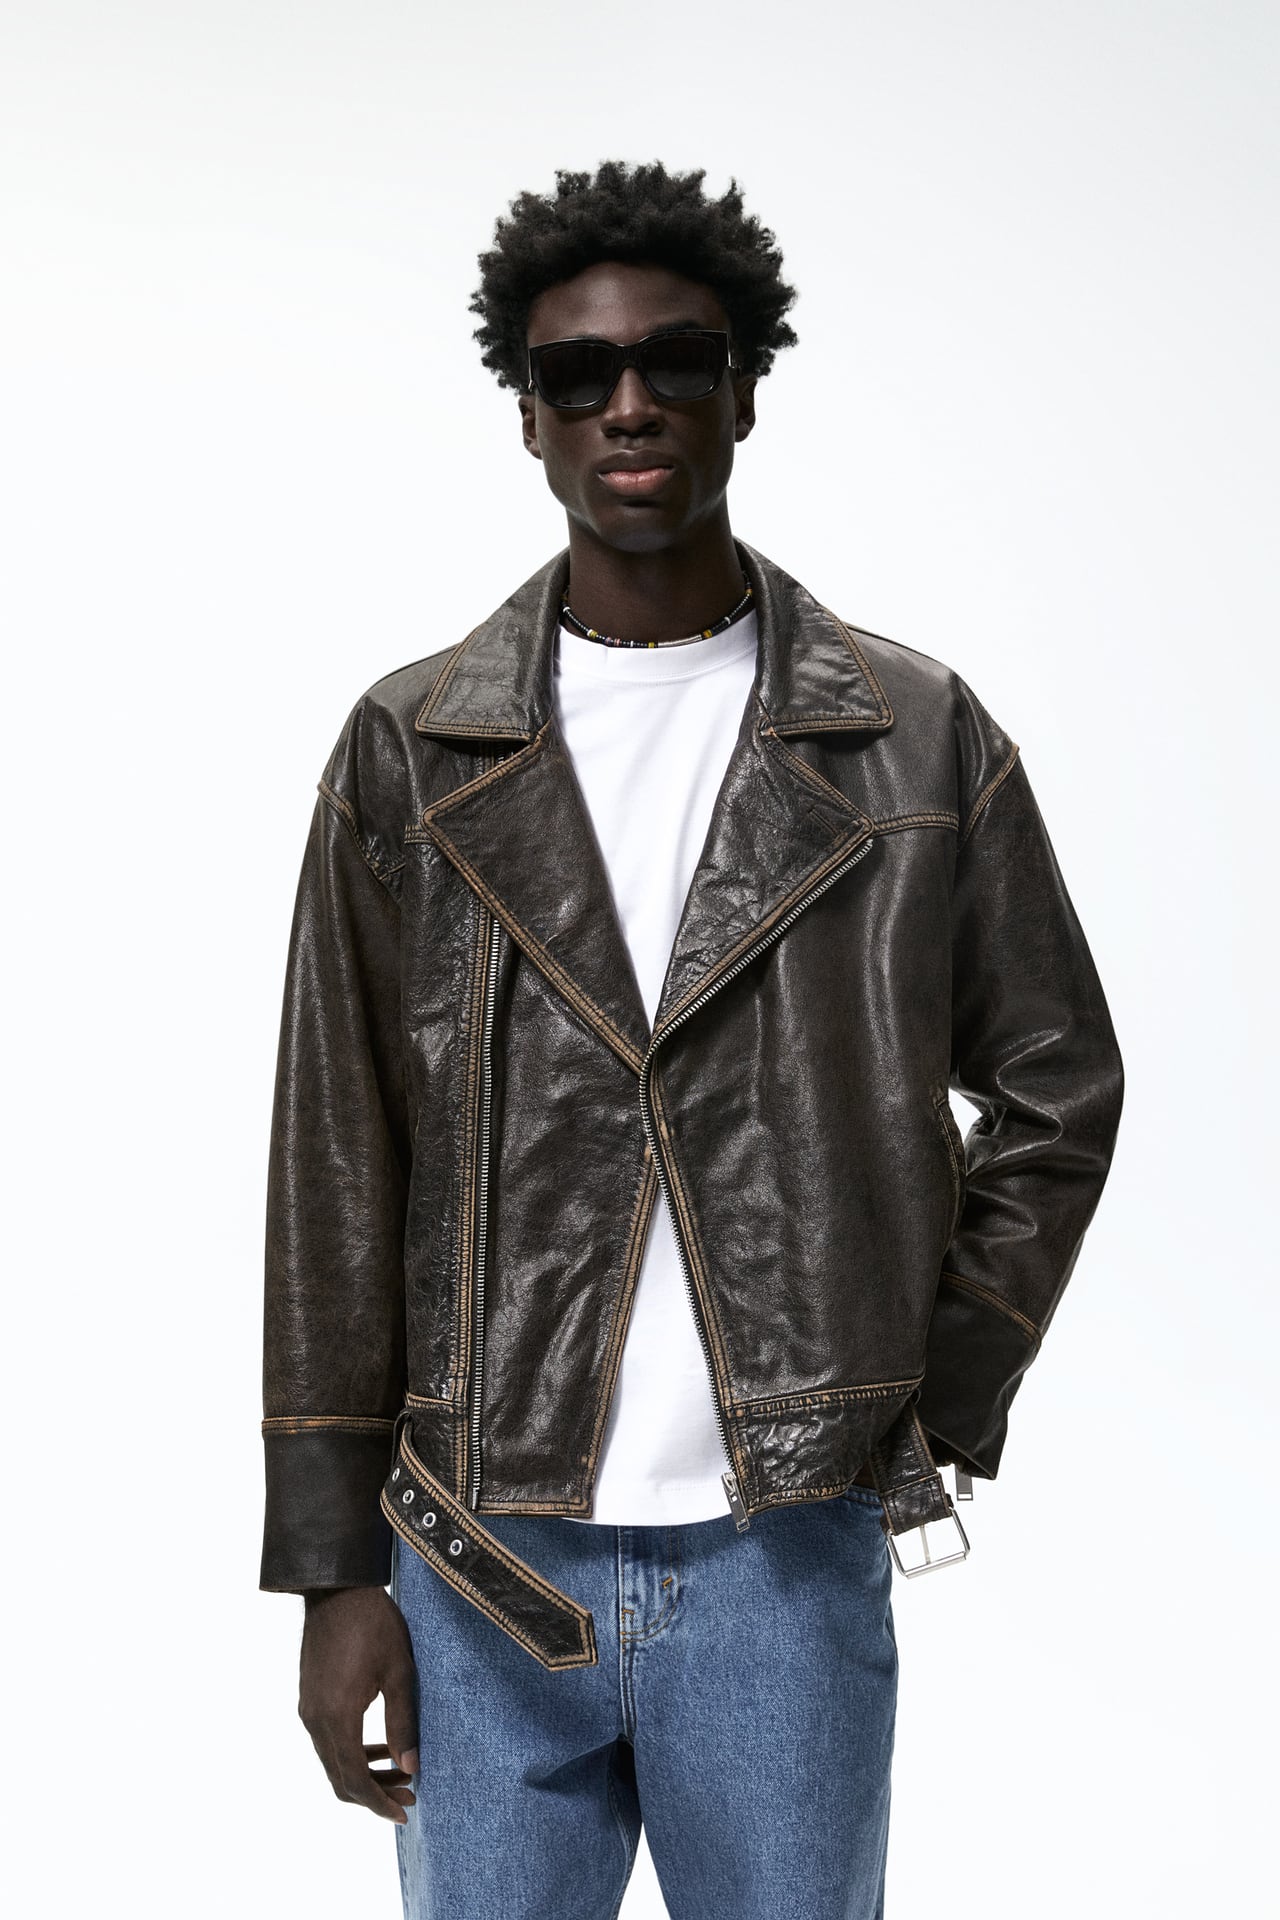 squat Street address Essentially The 30 Best Leather Jackets to Buy for Fall | Who What Wear